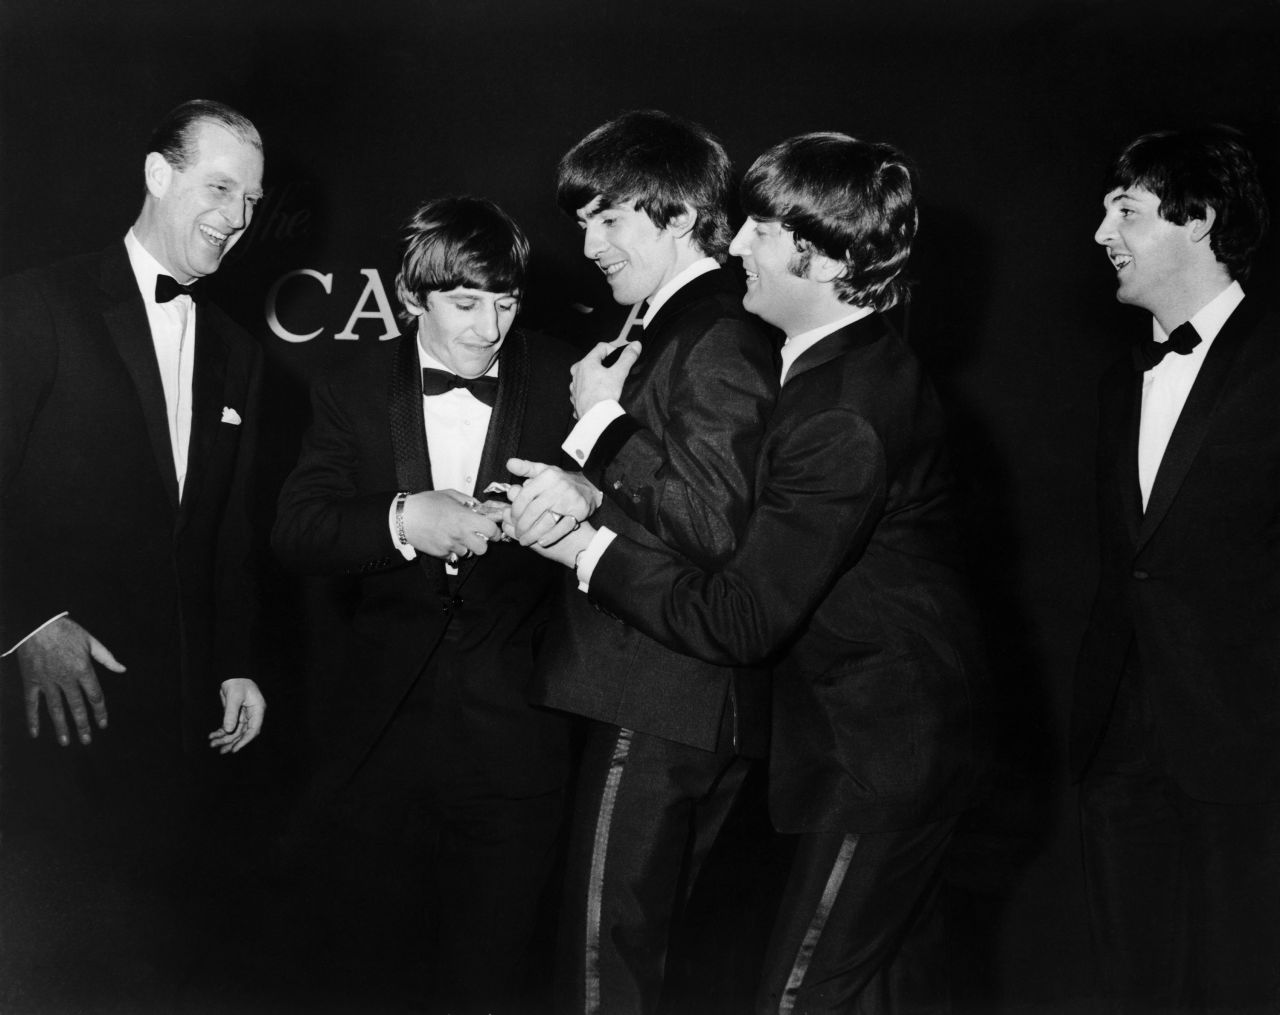 Prince Philip laughs as the Beatles fight over the Carl Alan Award he presented to the band in March 1964.